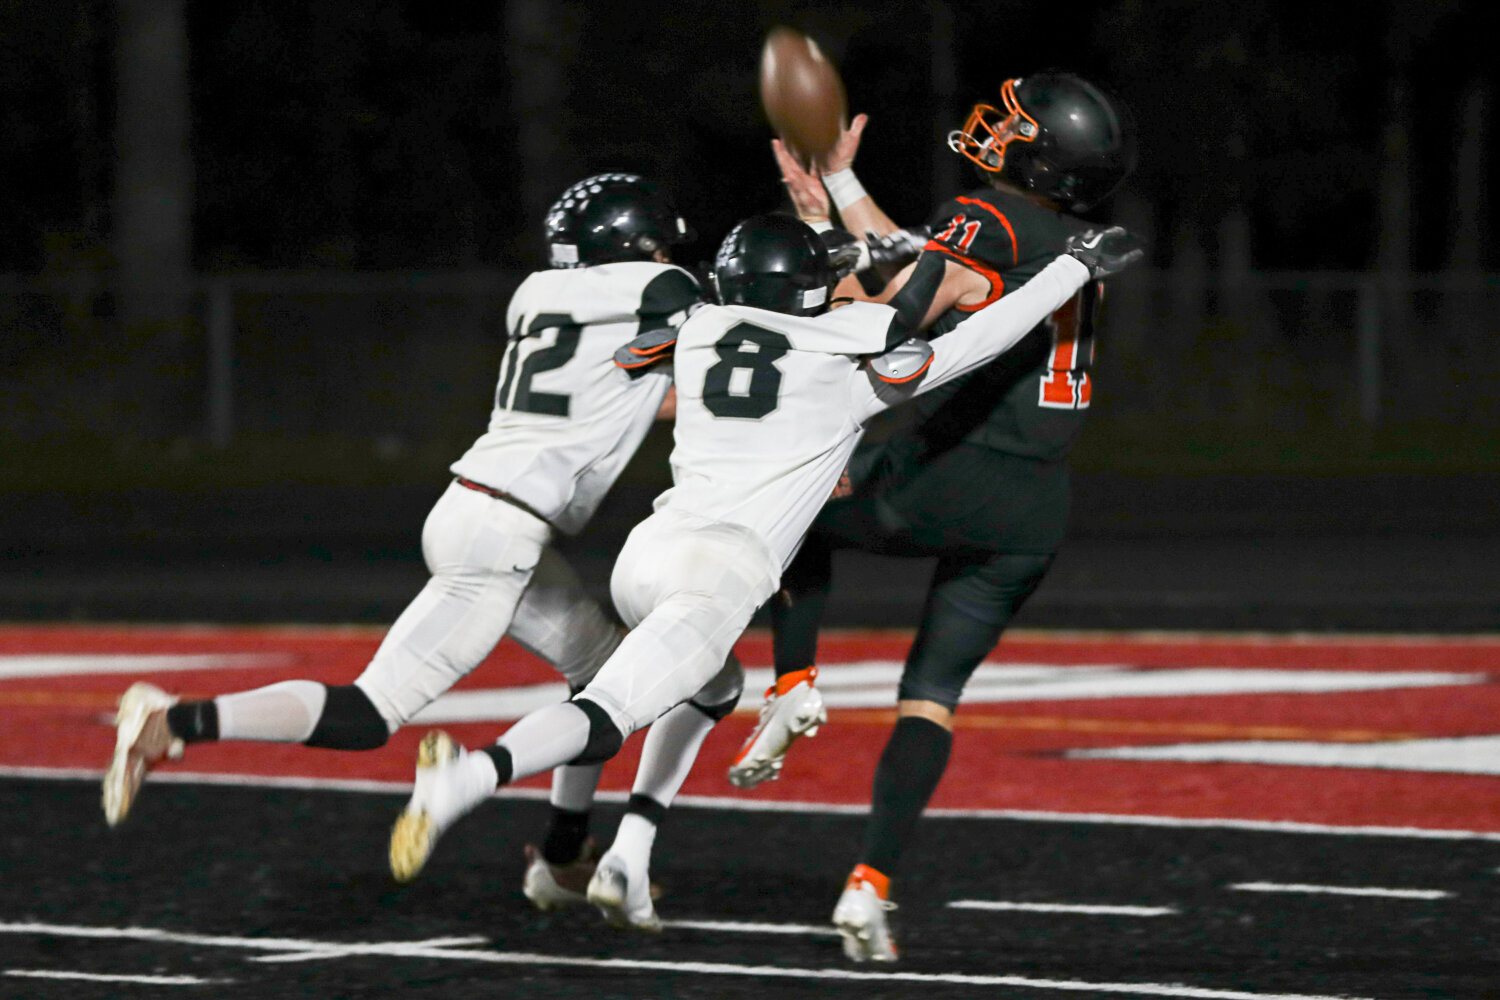 Colin Shields secures a catch during a 43-14 Napavine win over River View on Nov. 18.